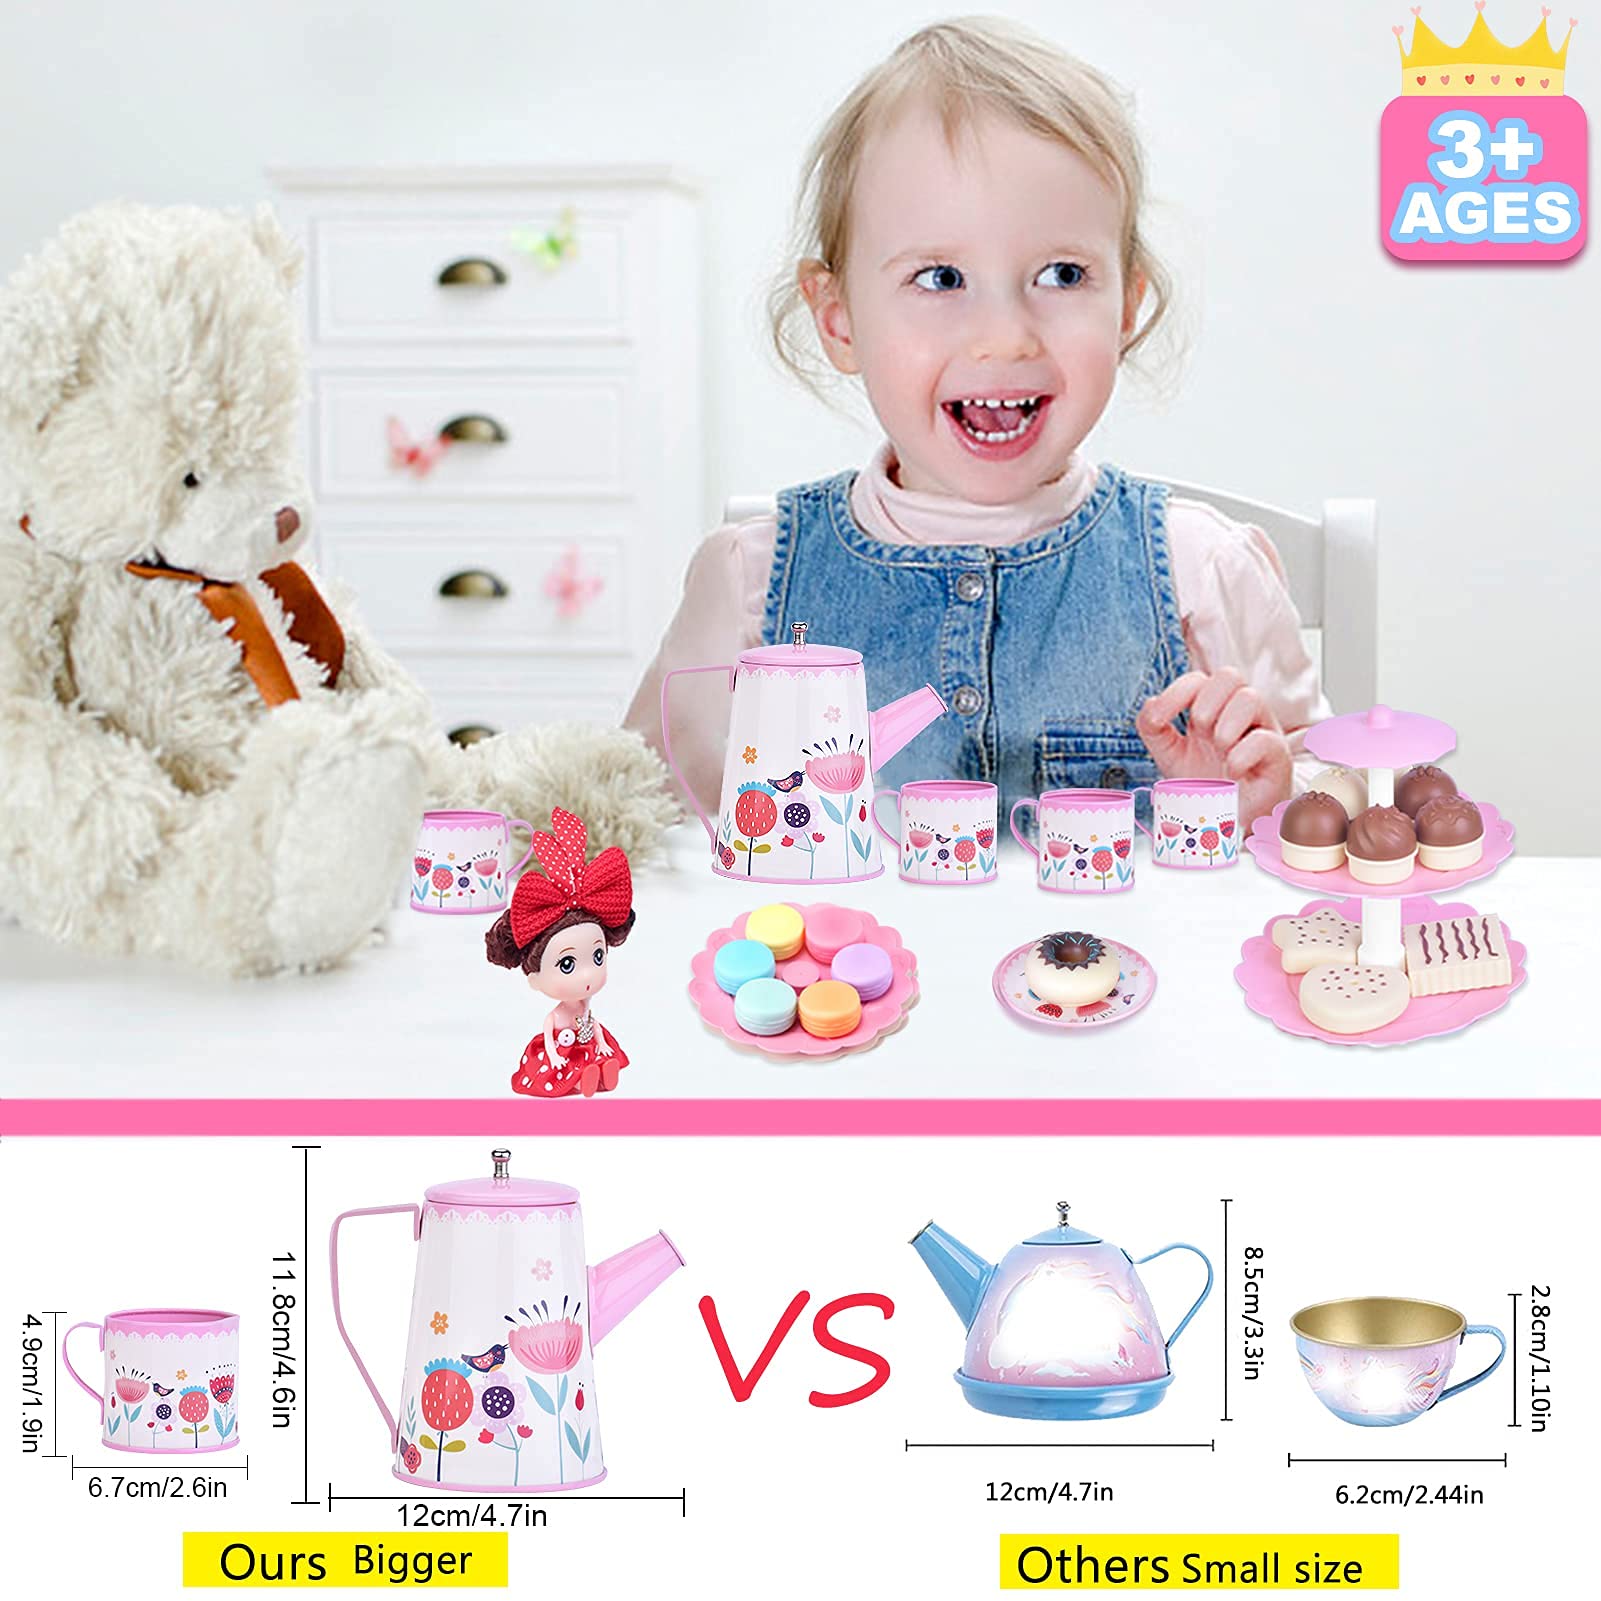 Tea Party Set for Little Girls - Tea Set Kids 38 Pcs Princess Tea Toy Set Including Teapot Tray Dessert Tower Cookie Cake Cute Dolls Kitchen Pretend Play Toy Gifts for Girls Age 3 4 5 6 7 8